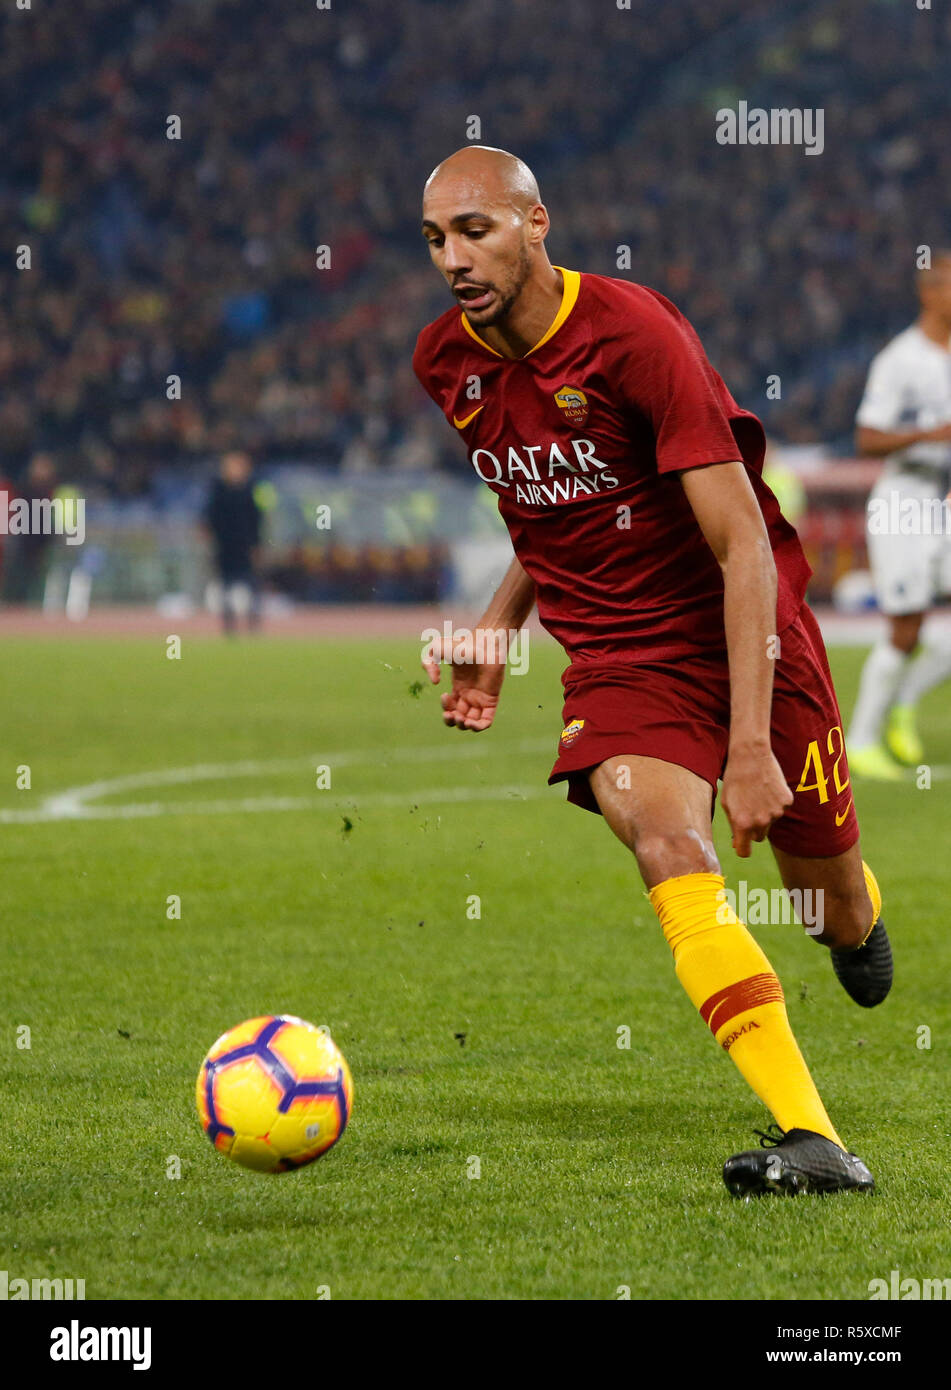 Rome, Italy. 2nd Dec, 2018. Roma's Steven Nzonzi in action during the Serie A soccer match between Roma and Inter at the Olympic Stadium. Credit: UPDATE IMAGES/ Alamy Live News Stock Photo